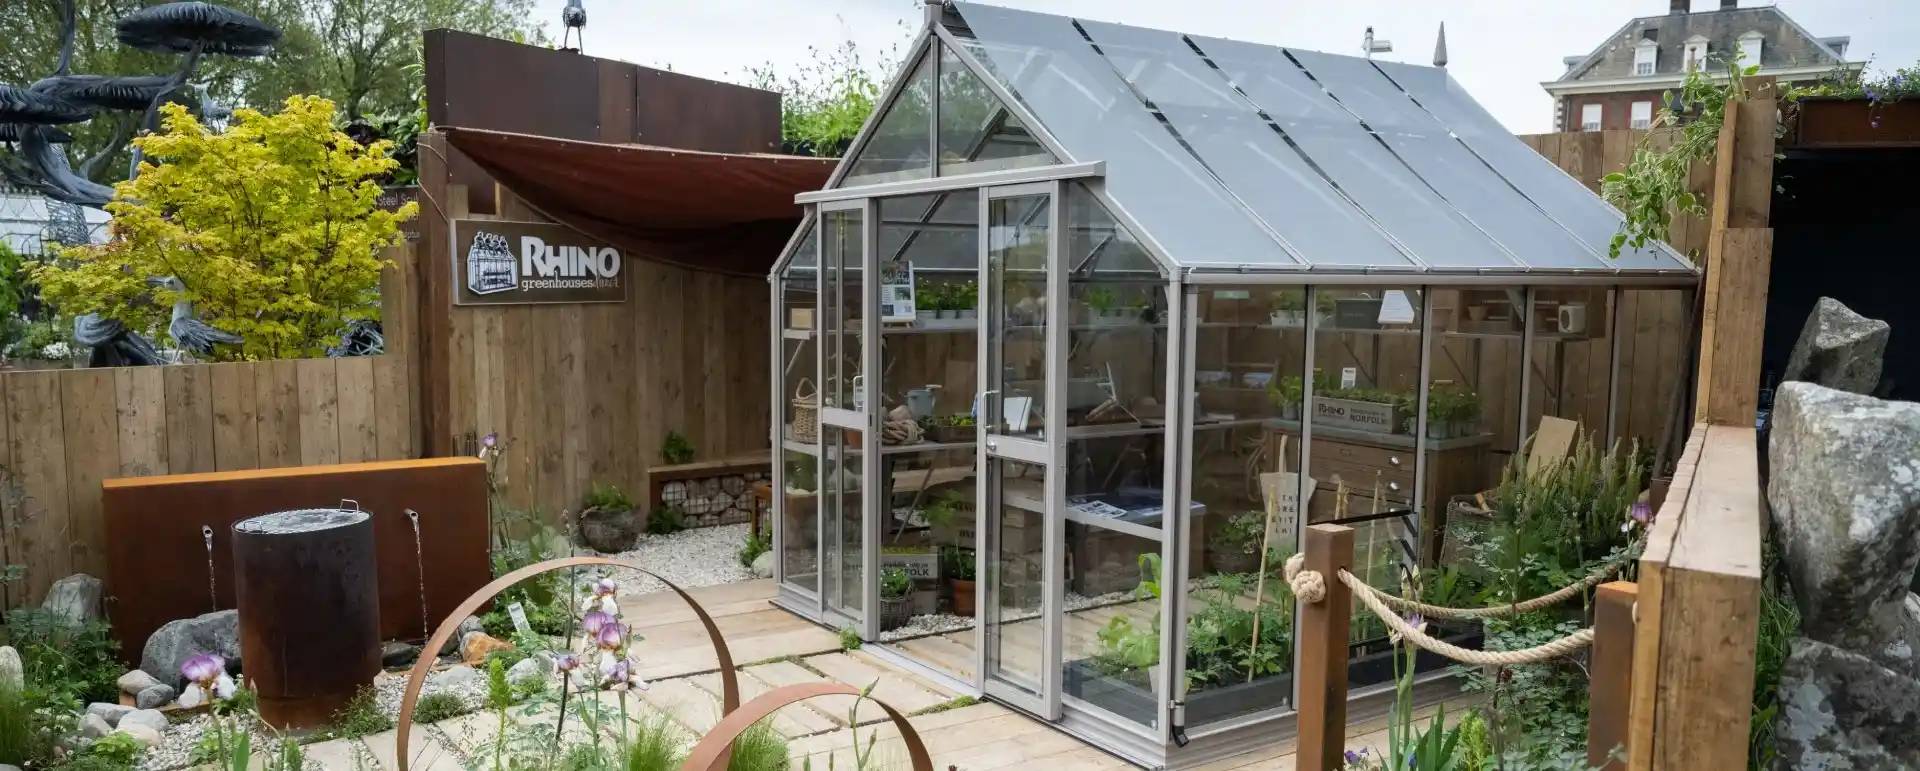 Rhino Greenhouse at Chelsea Flower Show